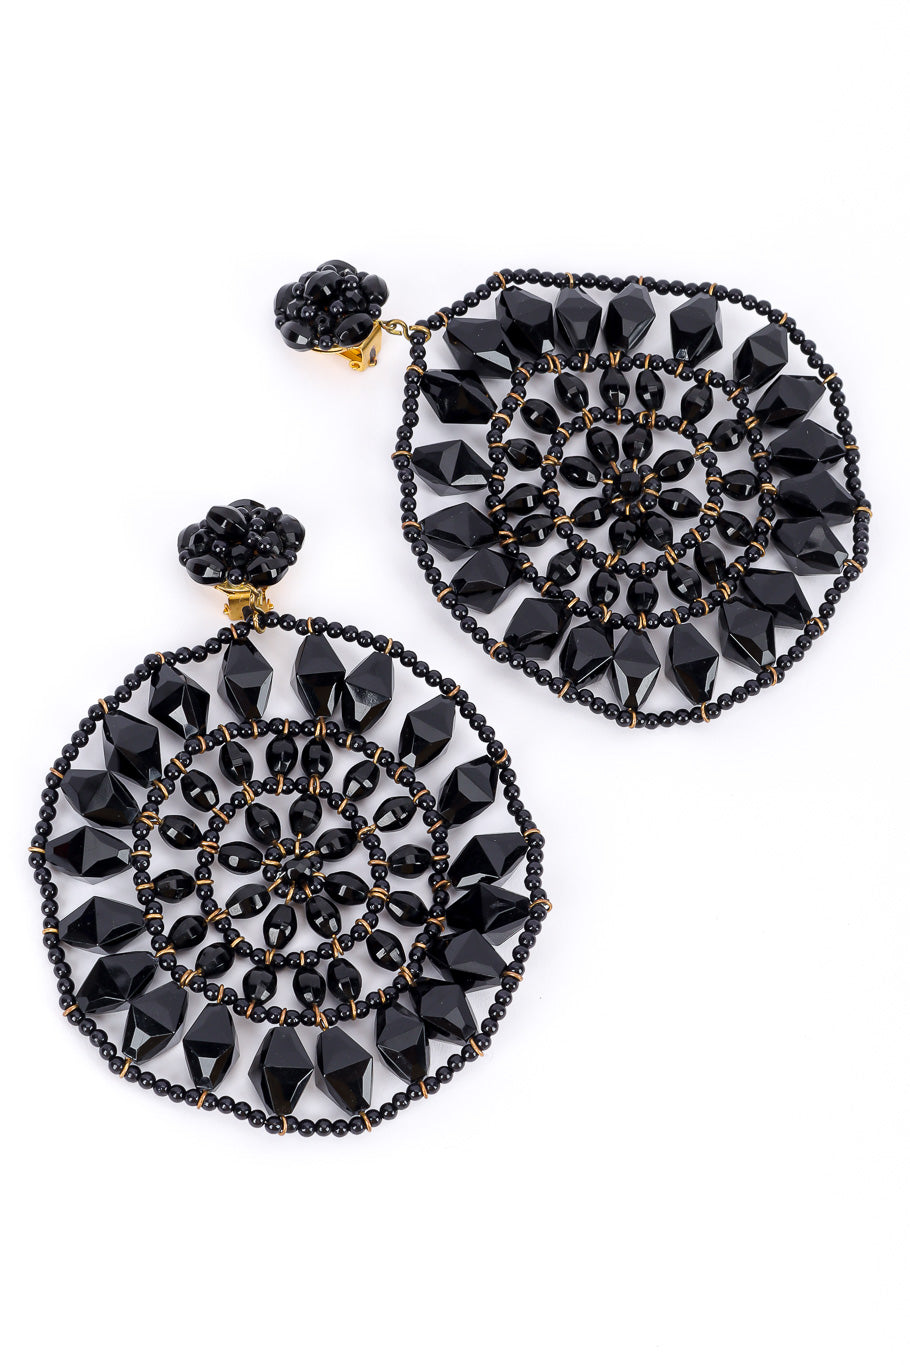 Vintage Beaded Circle Drop Earrings front view on white backdrop @Recessla